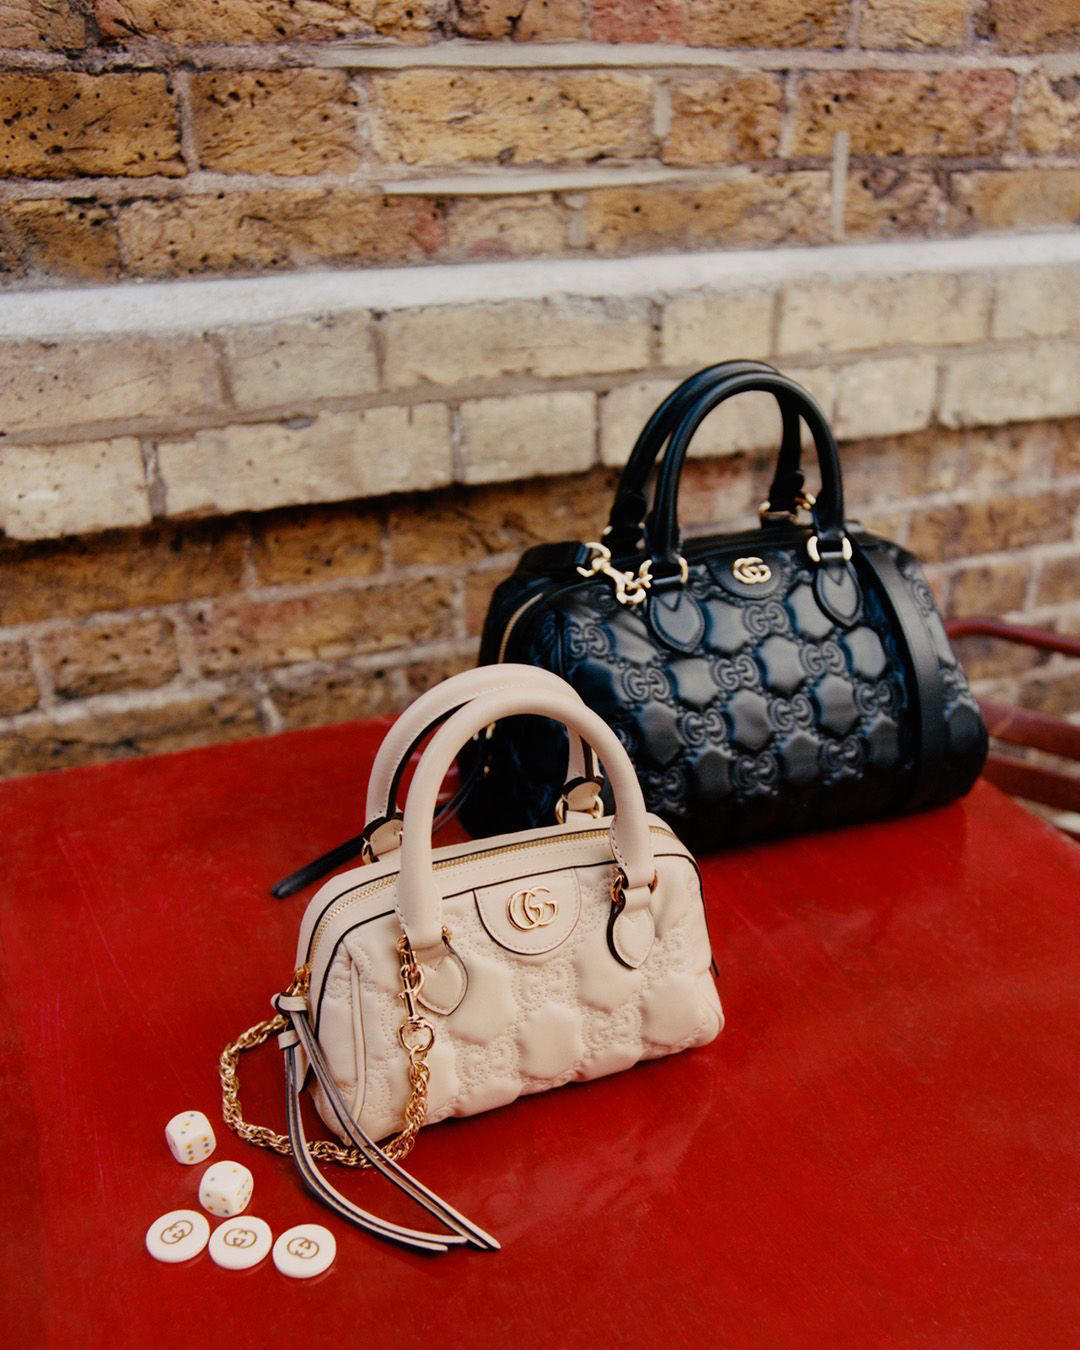 image  1 Handbags presented in GG Matelassé, a new leather that reimagines the House’s monogram with a new ta